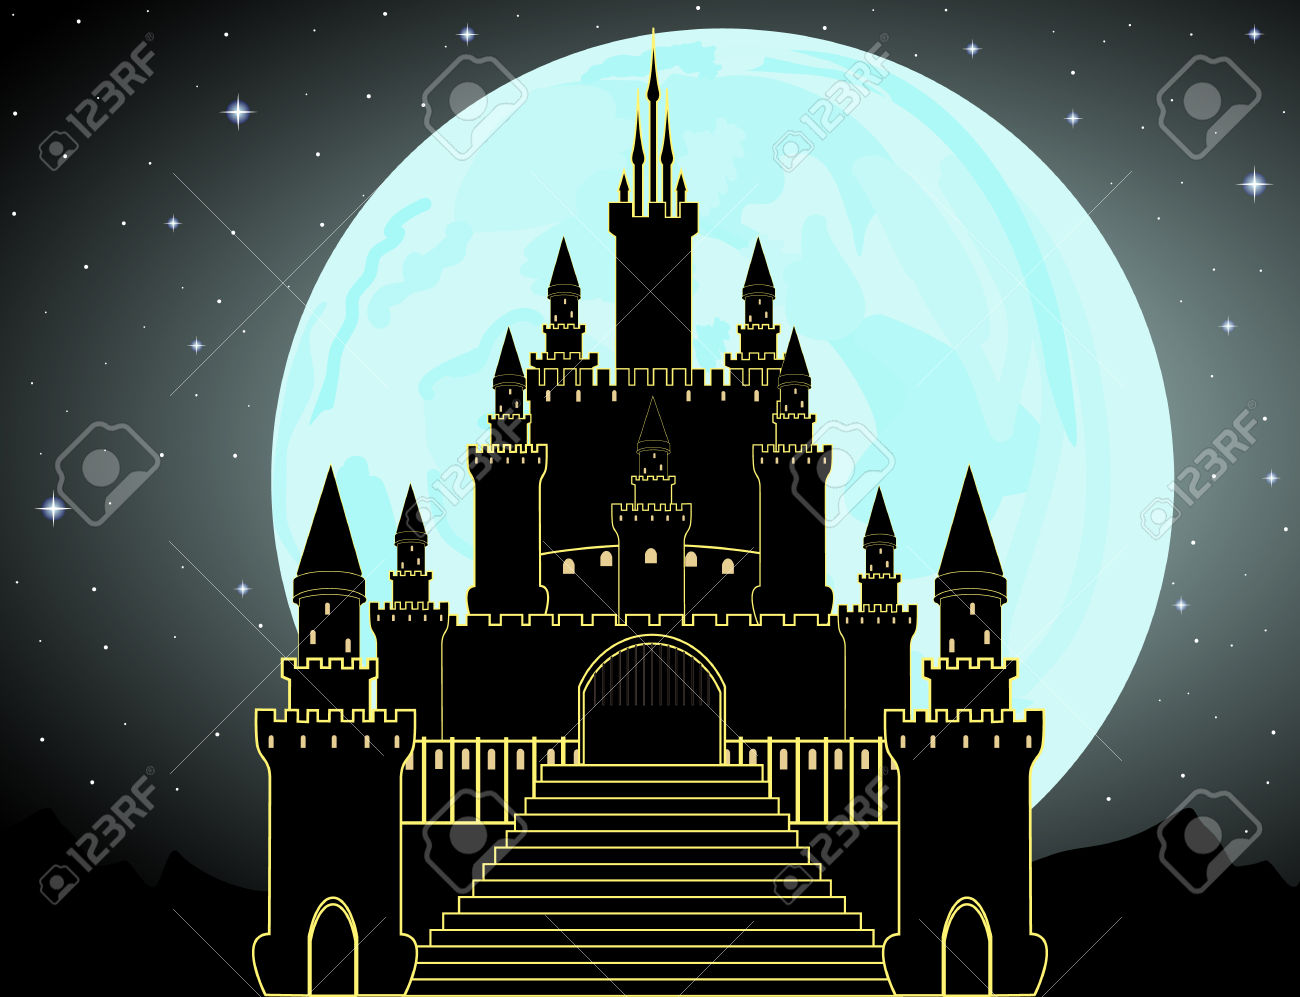 Dracula's Castle clipart #11, Download drawings